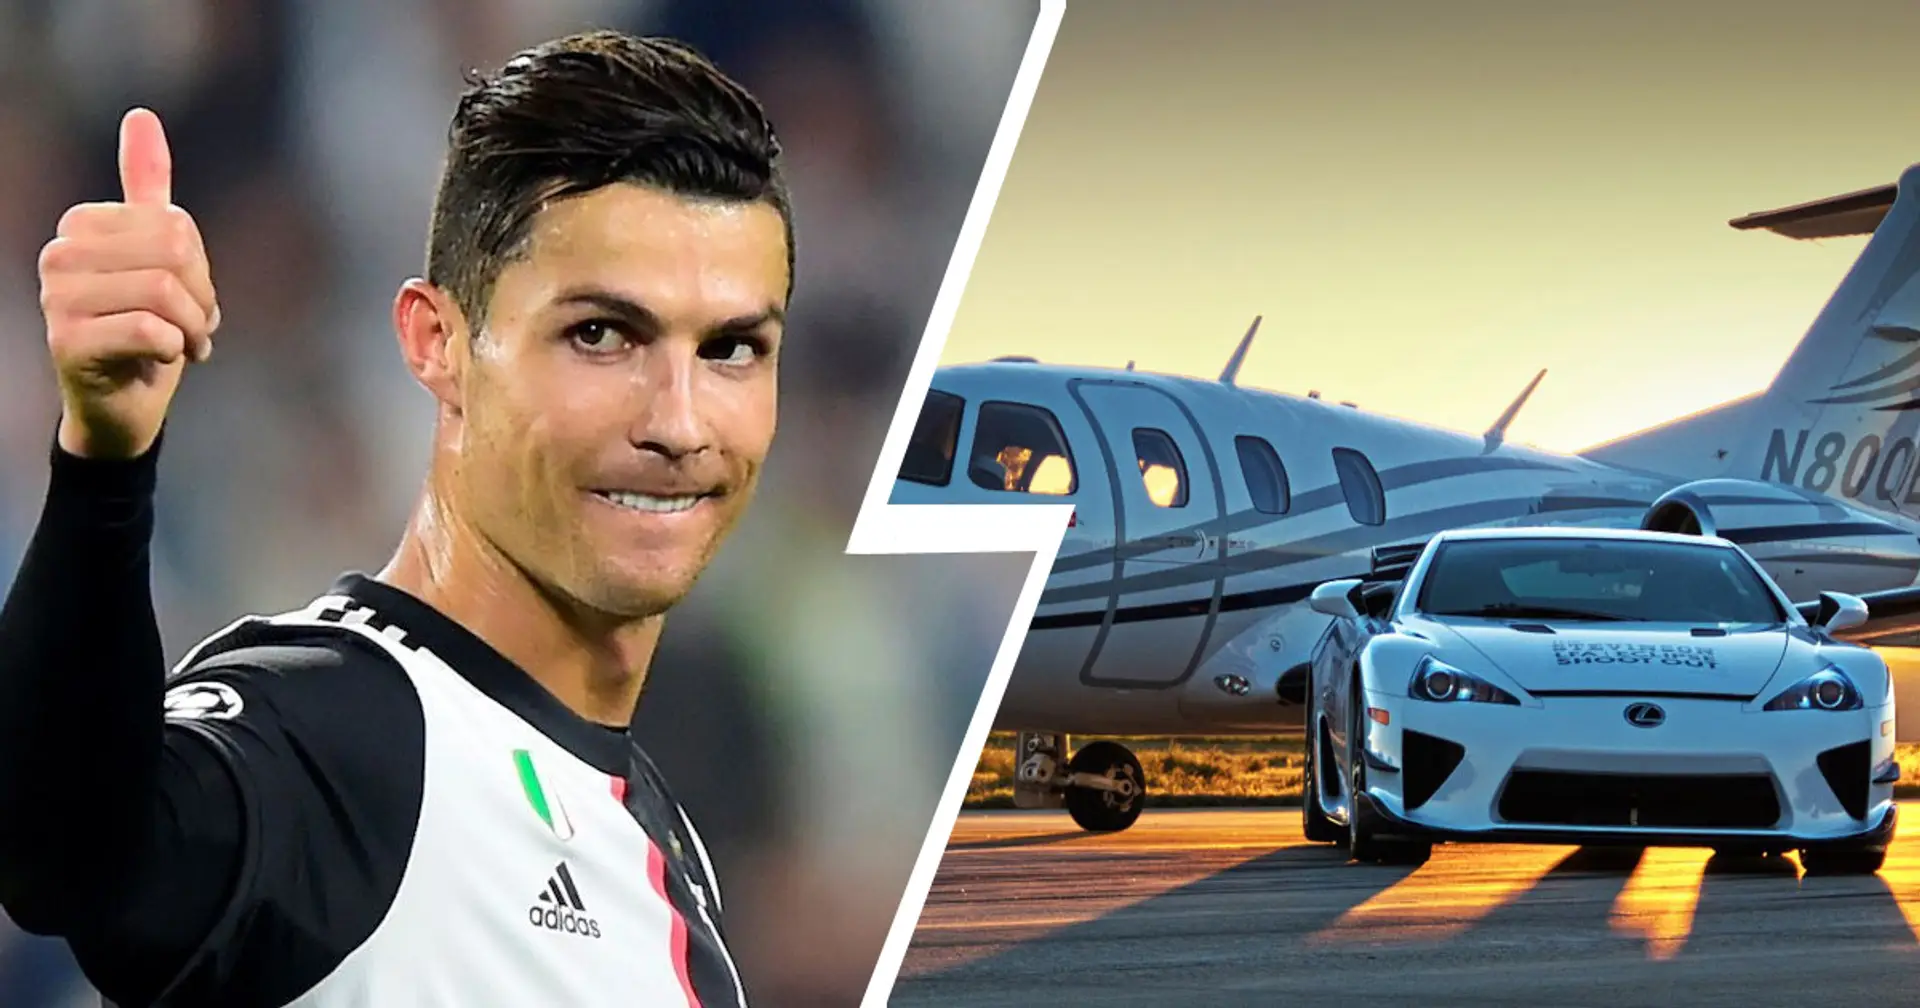 Cristiano Ronaldo's wealth: house, cars, jet, net worth, current contract, sponsorship deals 